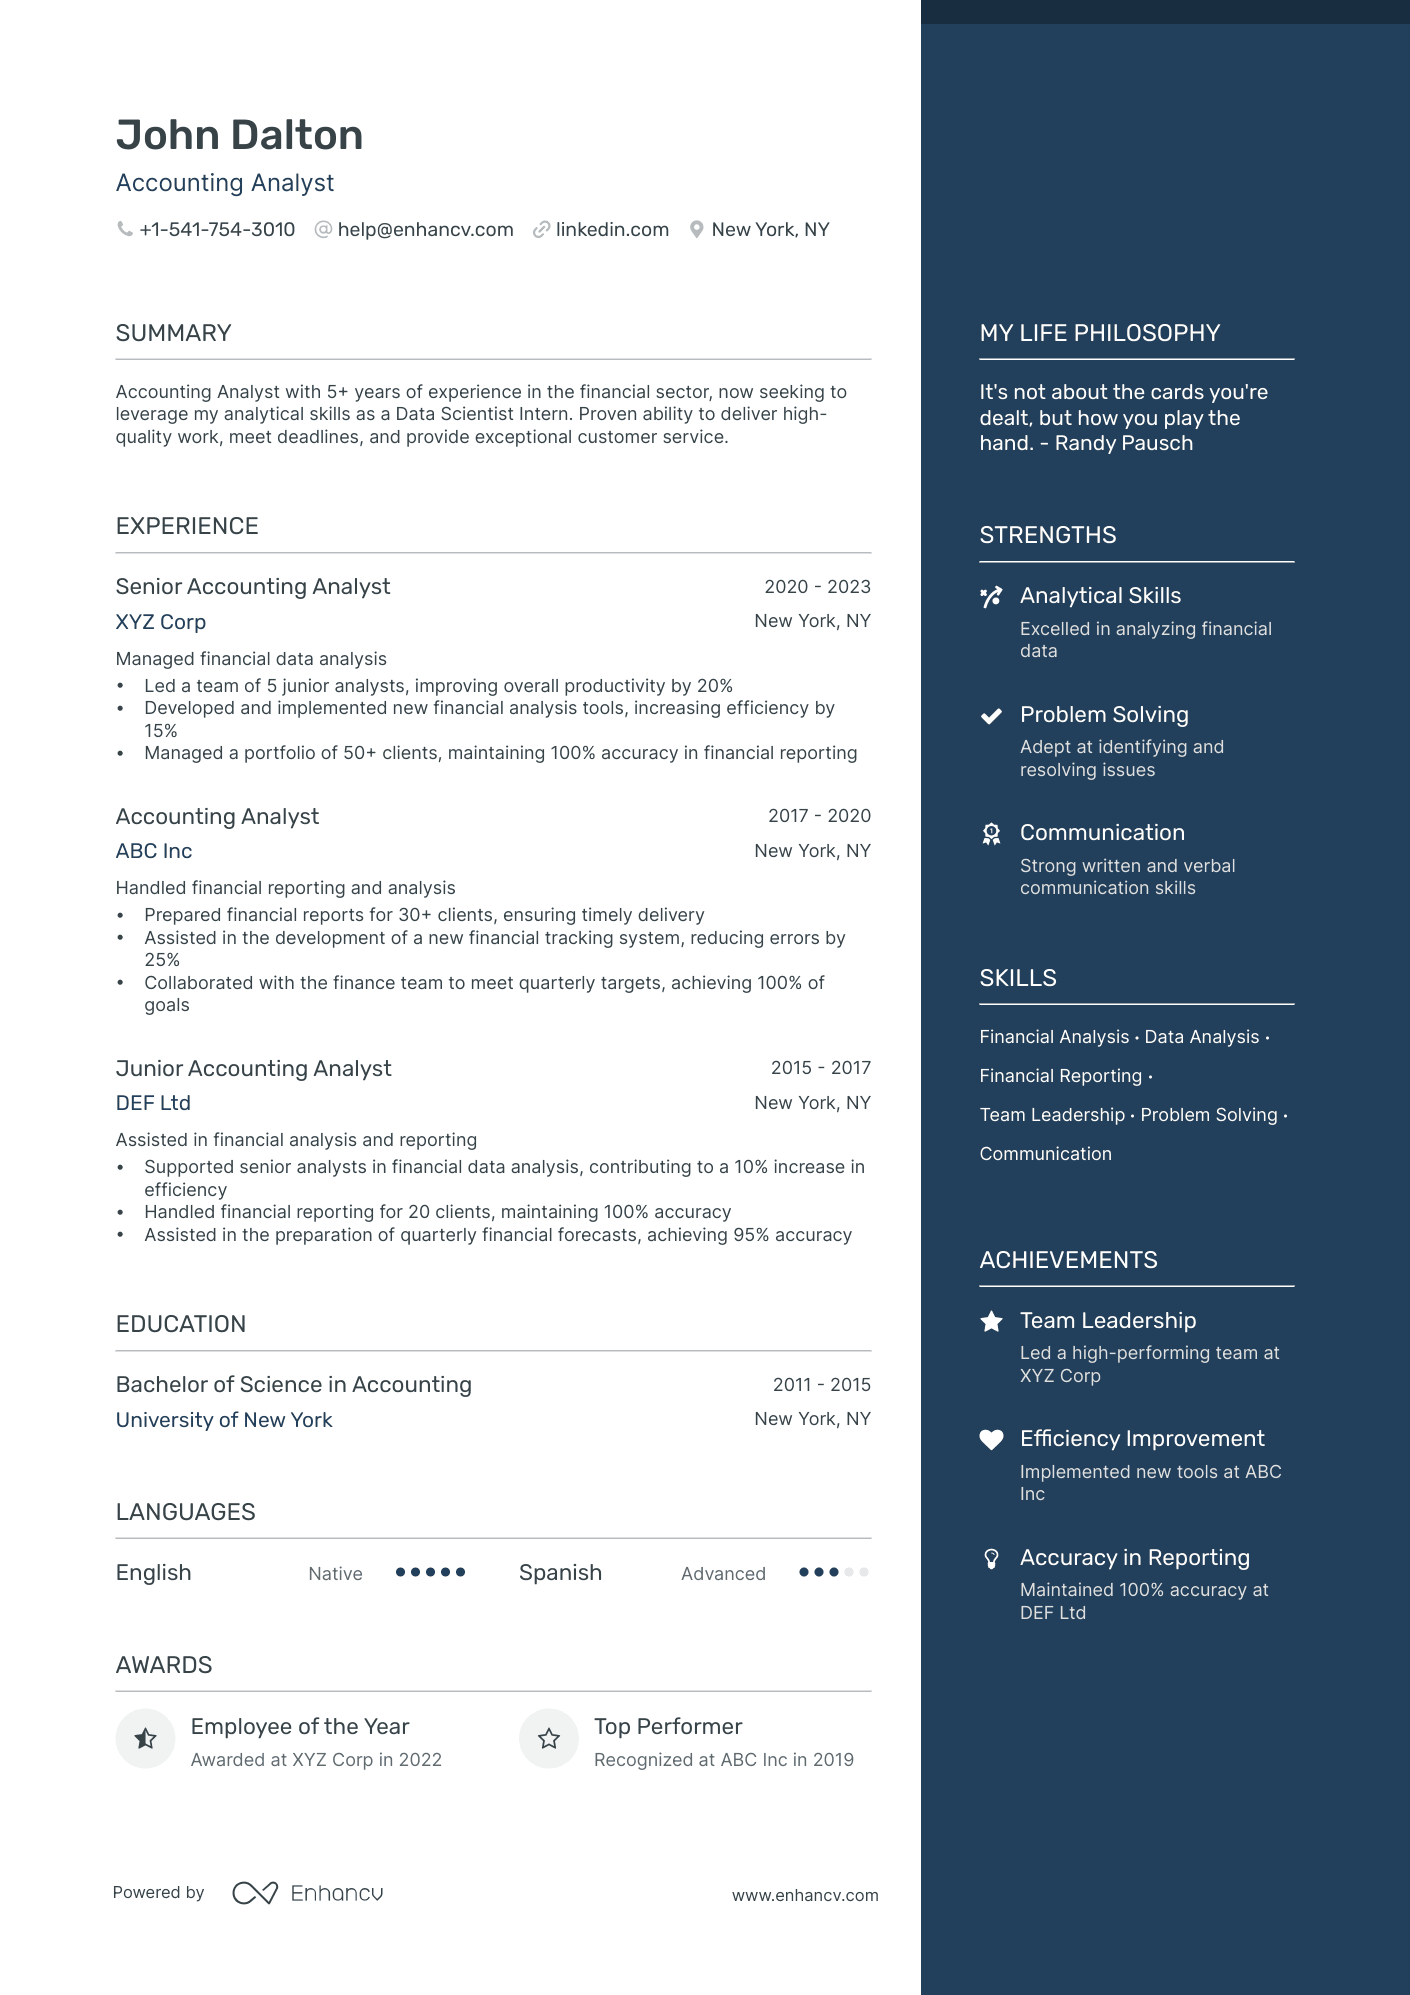 Accounting Analyst resume example